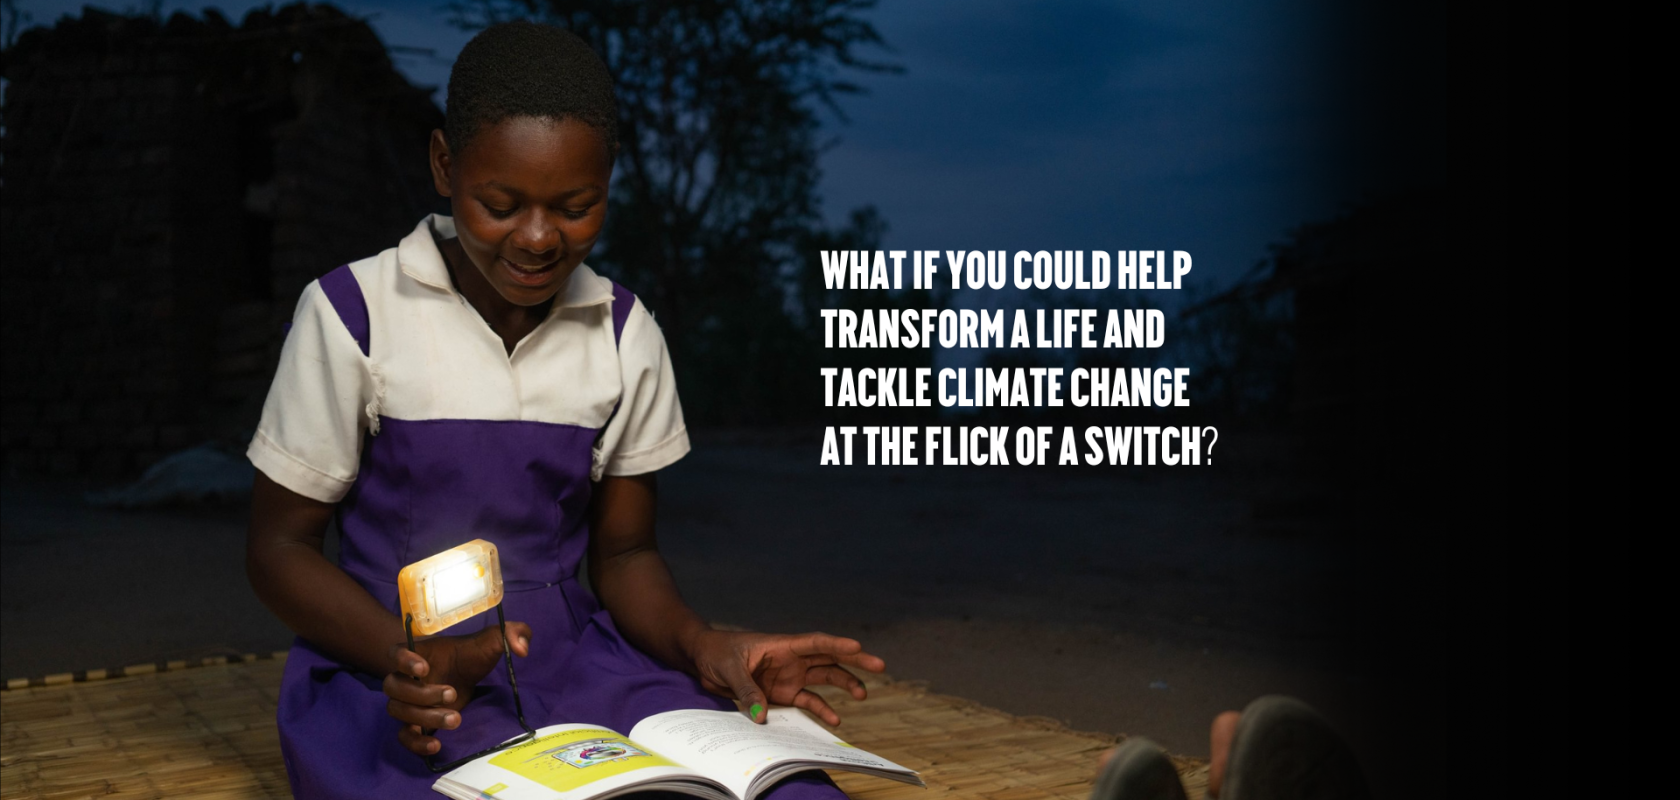 What if you could help transform a life and tackle climate change at the flick of a switch?